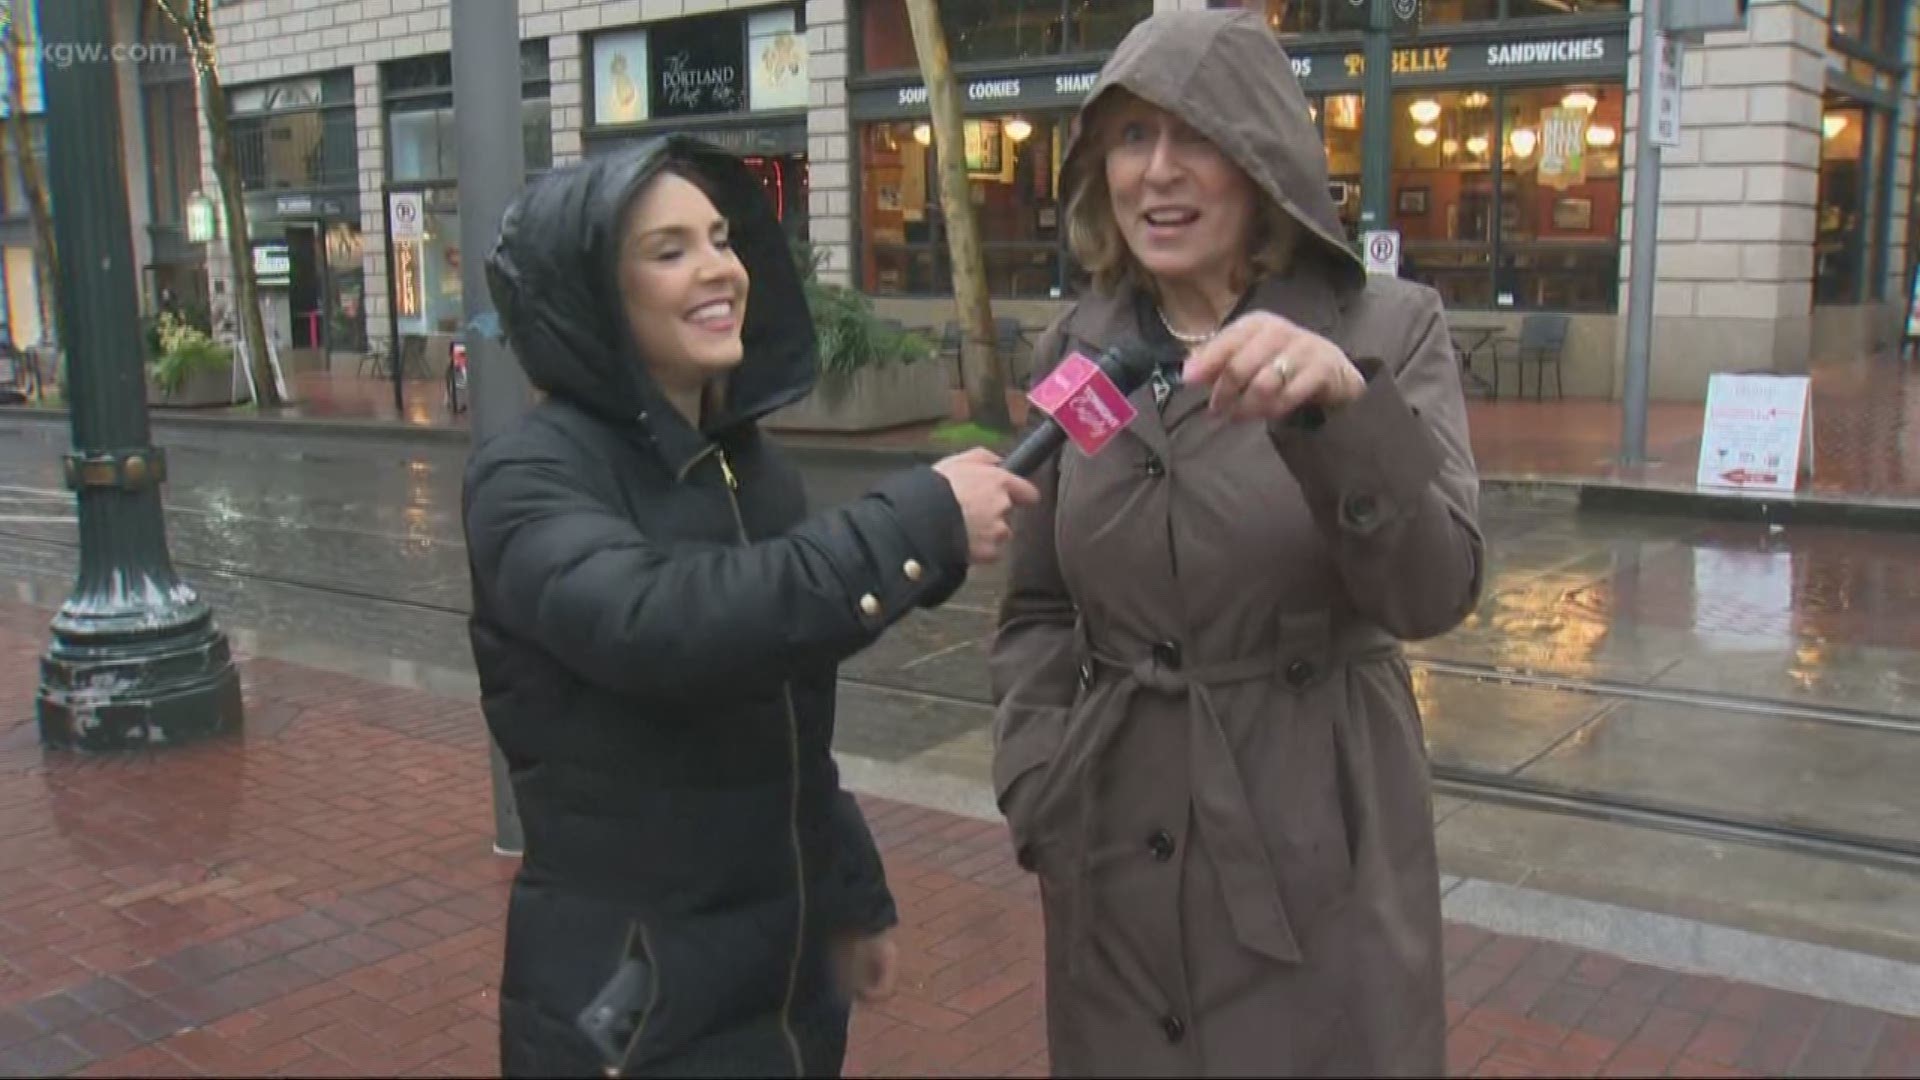 Our Adulting Challenge for this week is to give out one compliment a day. So Cassidy Quinn went to downtown Portland to compliment some strangers.